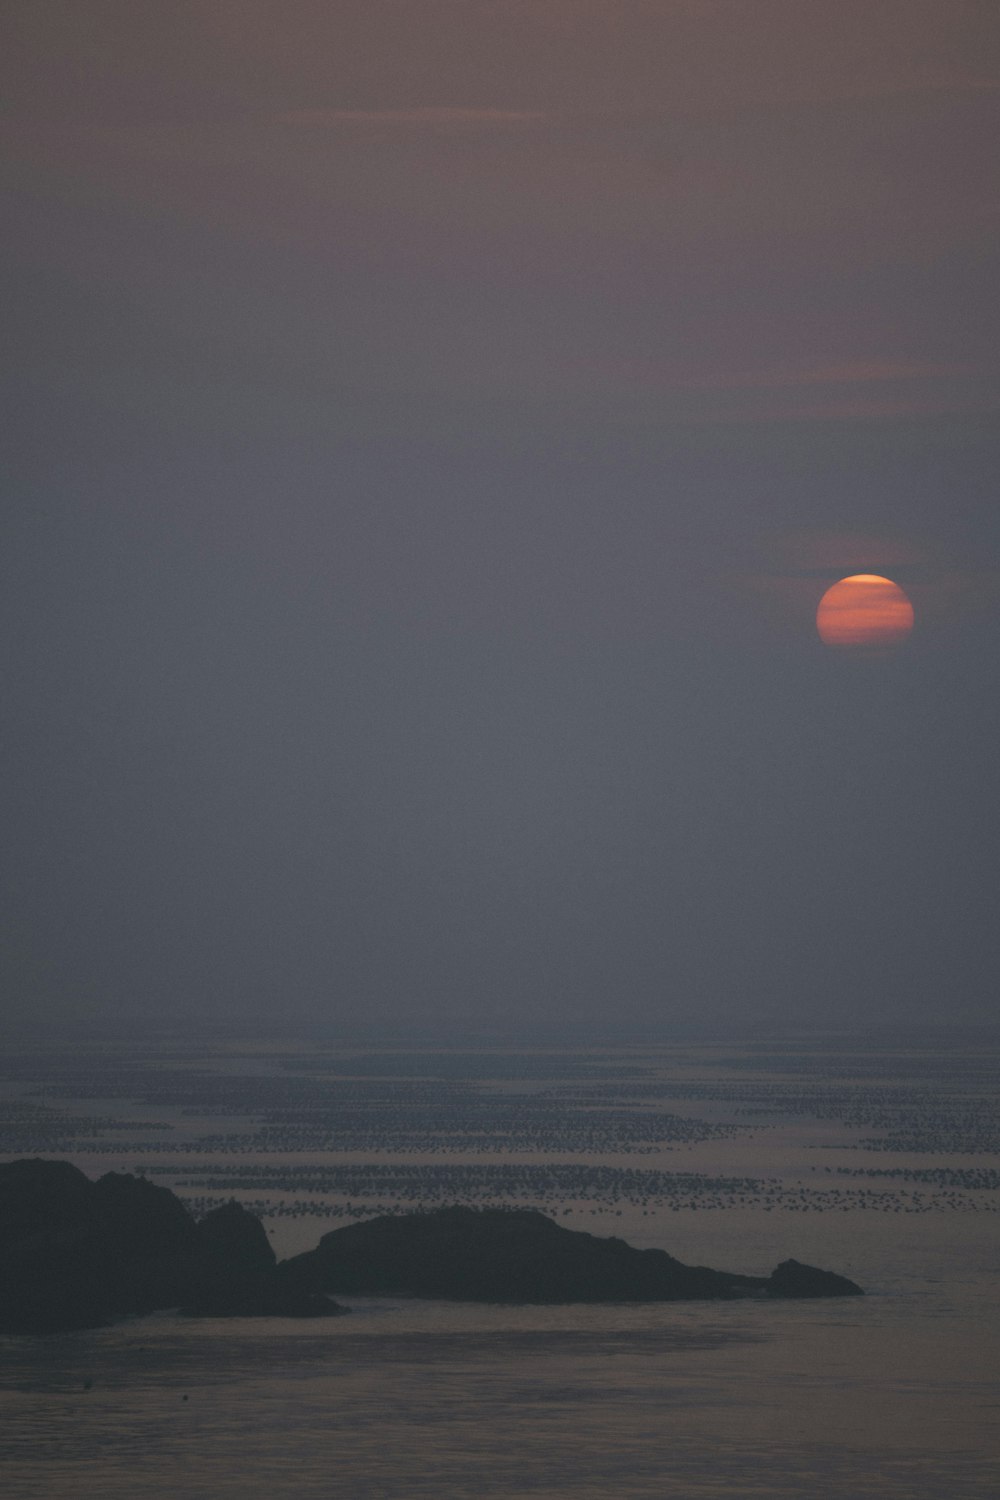 the sun is setting over the ocean with a small island in the foreground